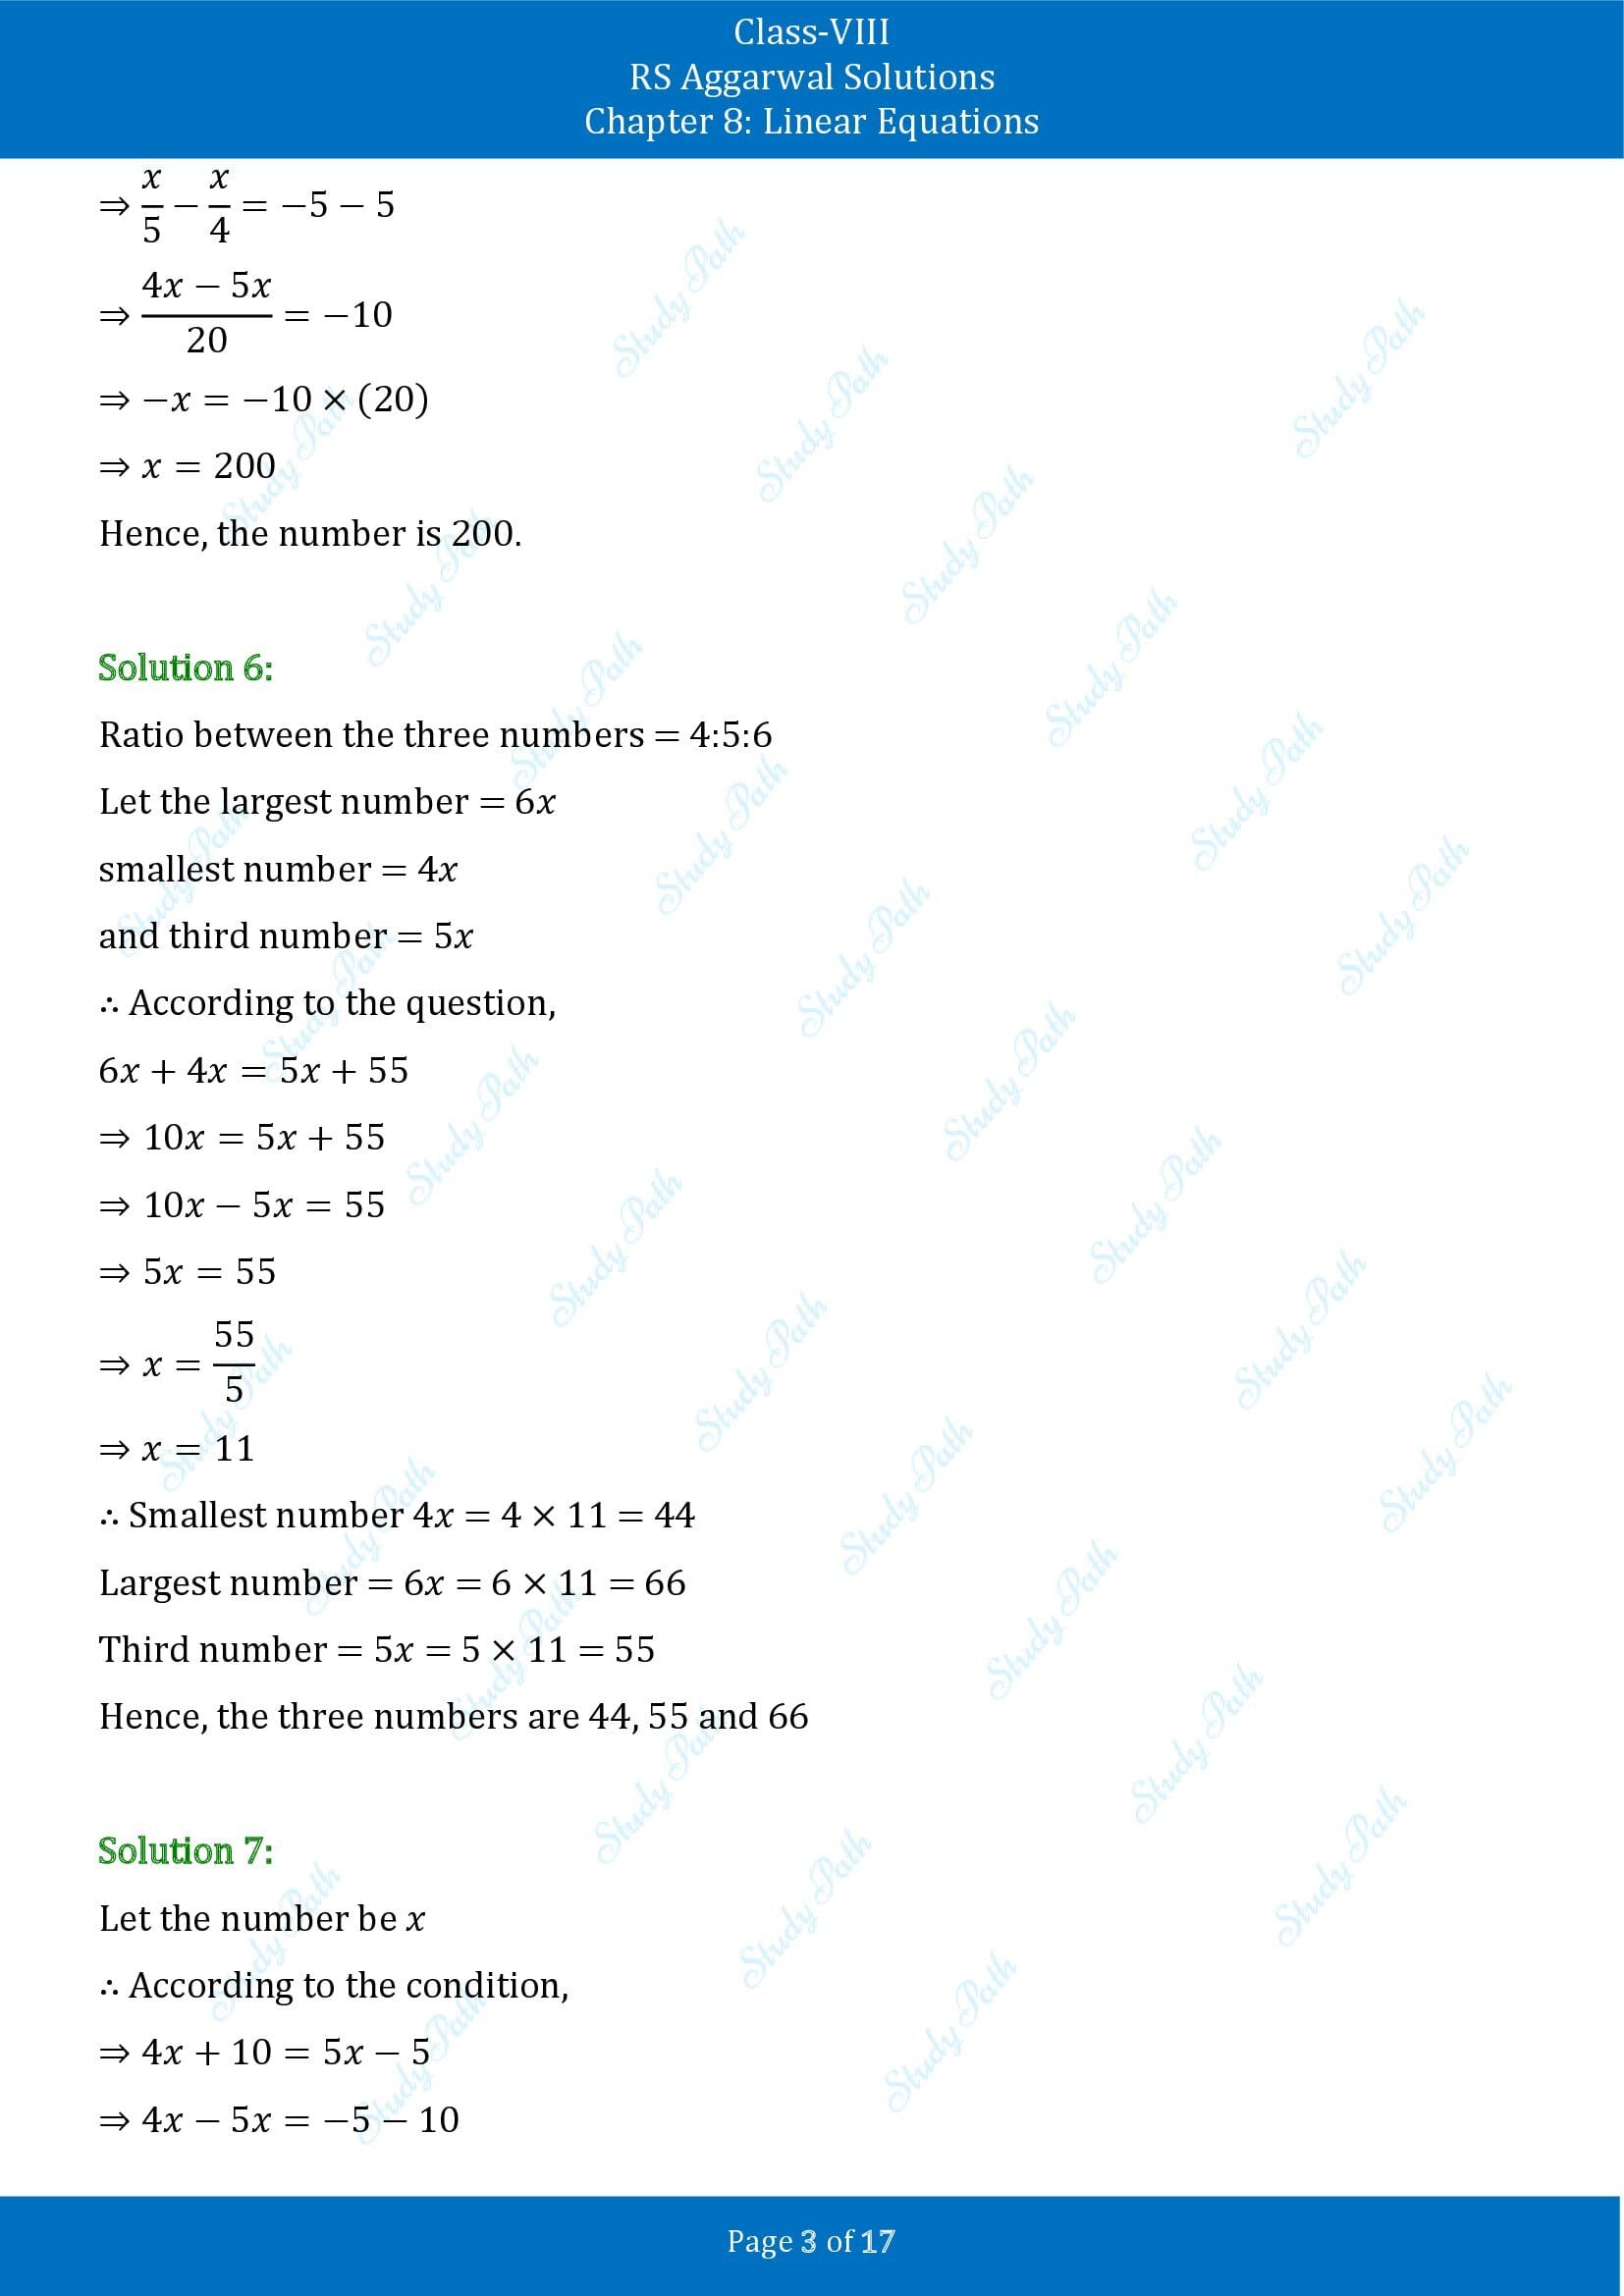 RS Aggarwal Solutions Class 8 Chapter 8 Linear Equations Exercise 8B 00003